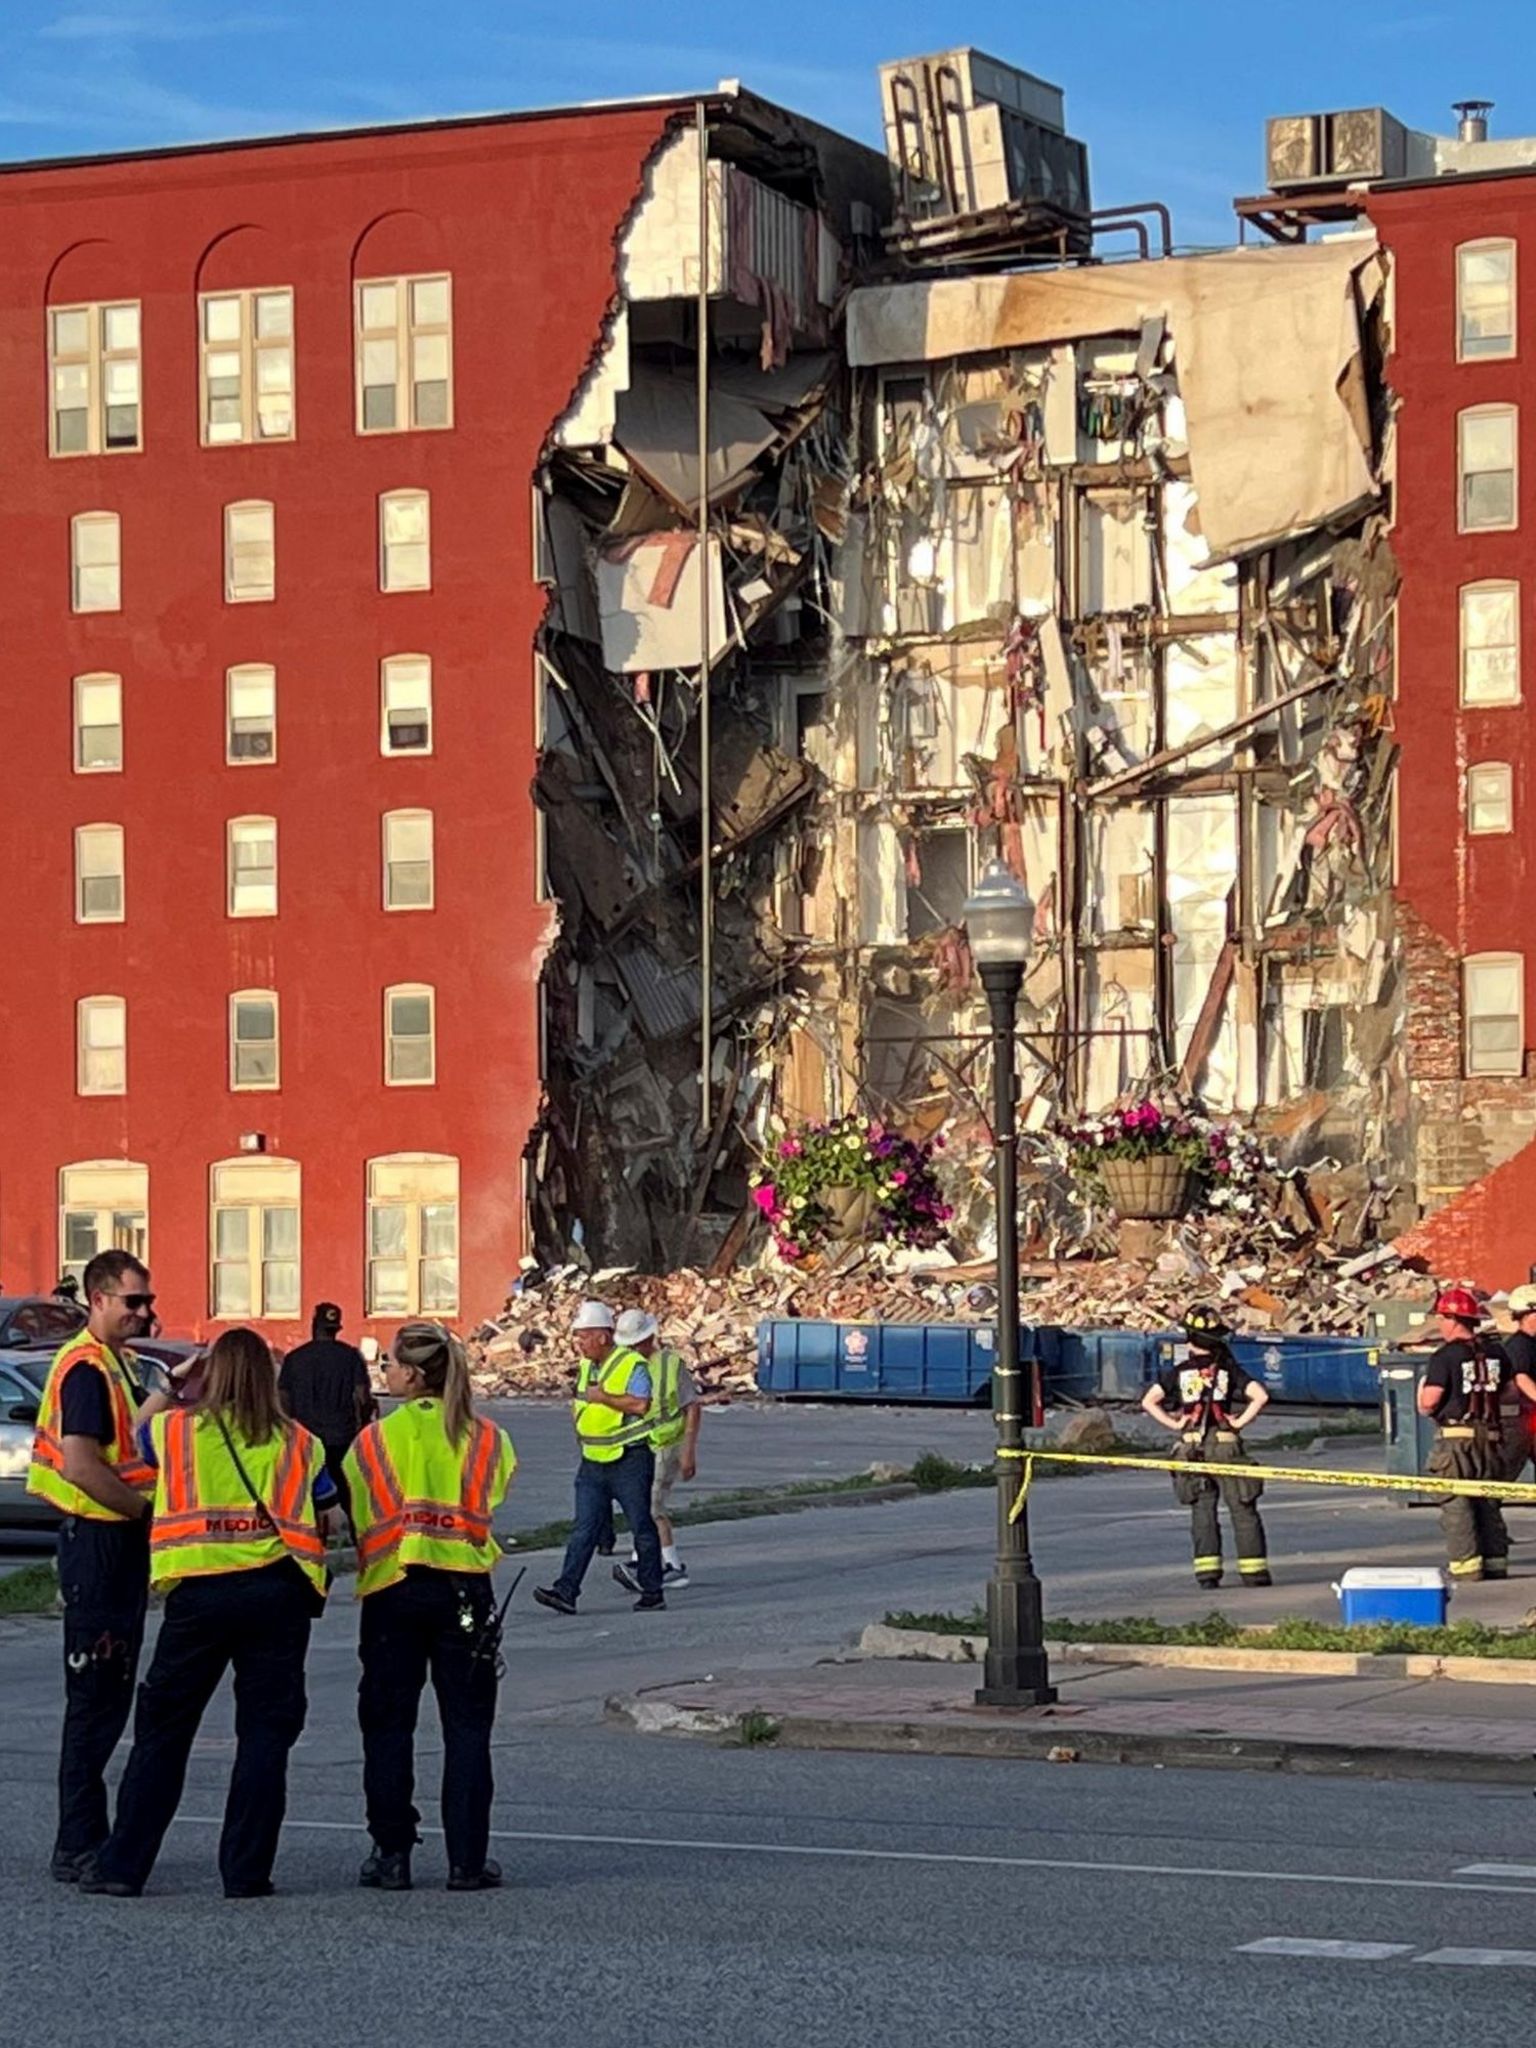 US: Two believed trapped after Davenport, Iowa building collapse